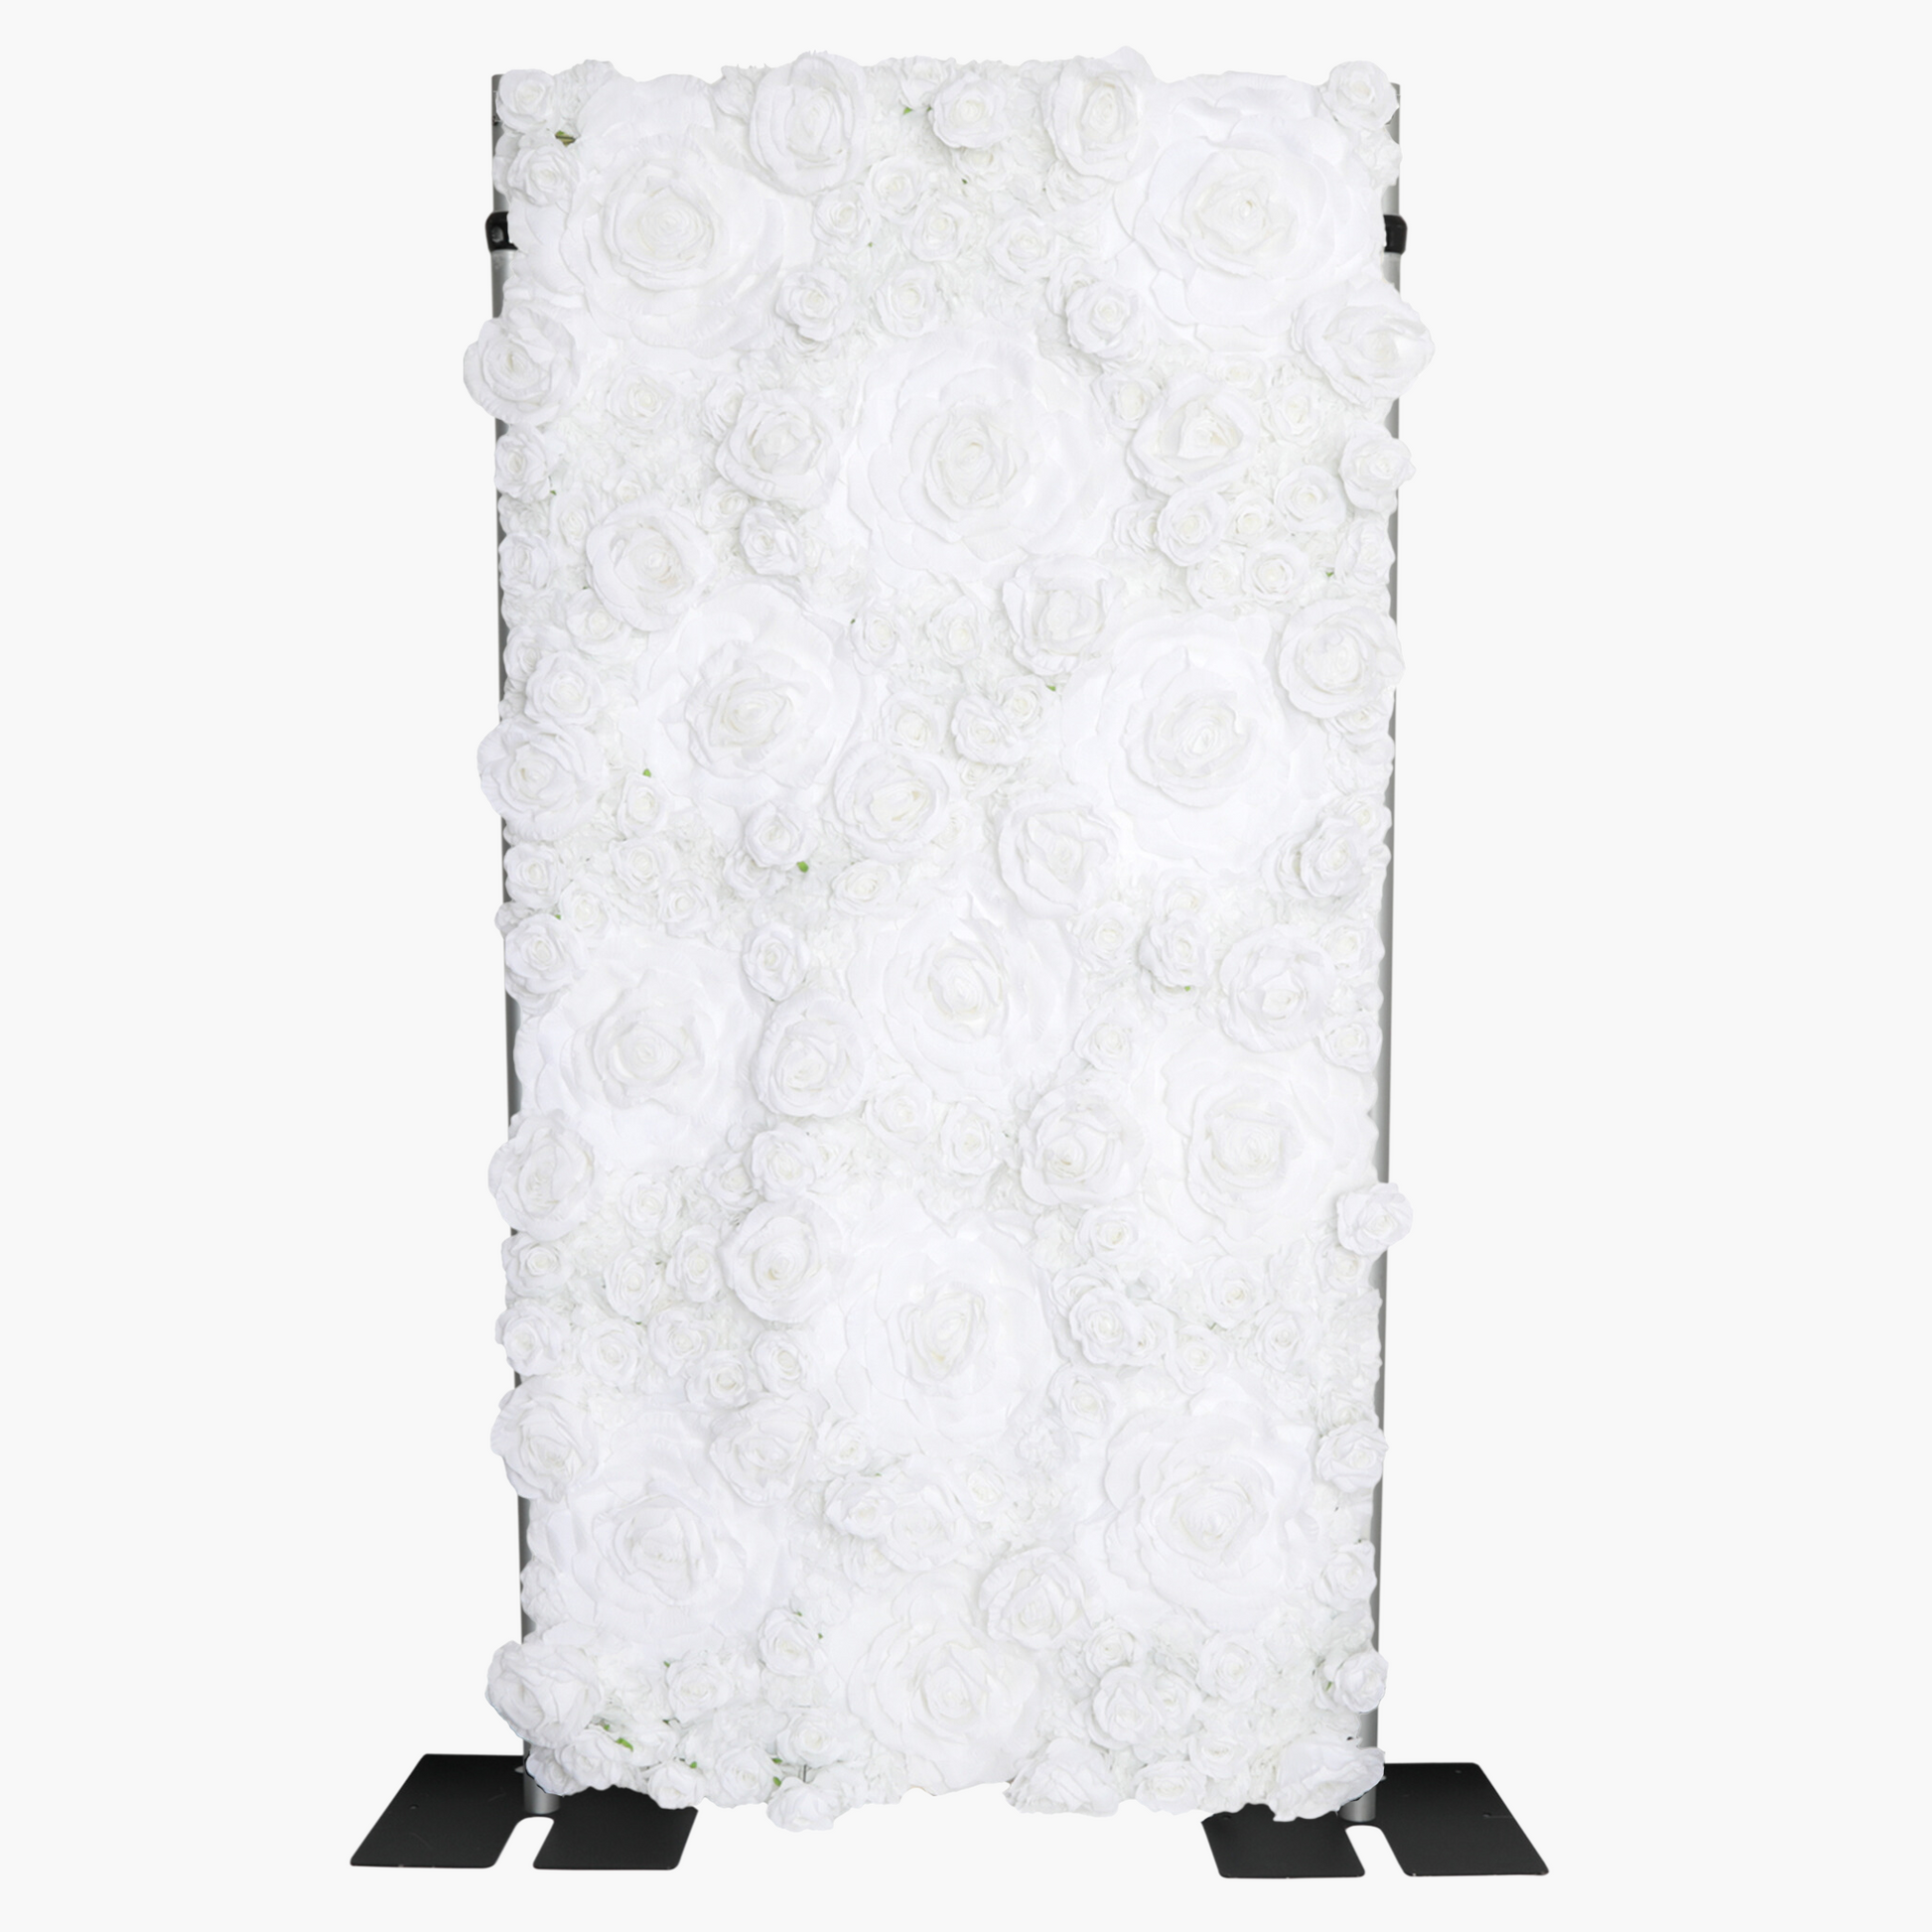 Luxe Roll Up Flower Wall Backdrop 8ft x 4ft - White